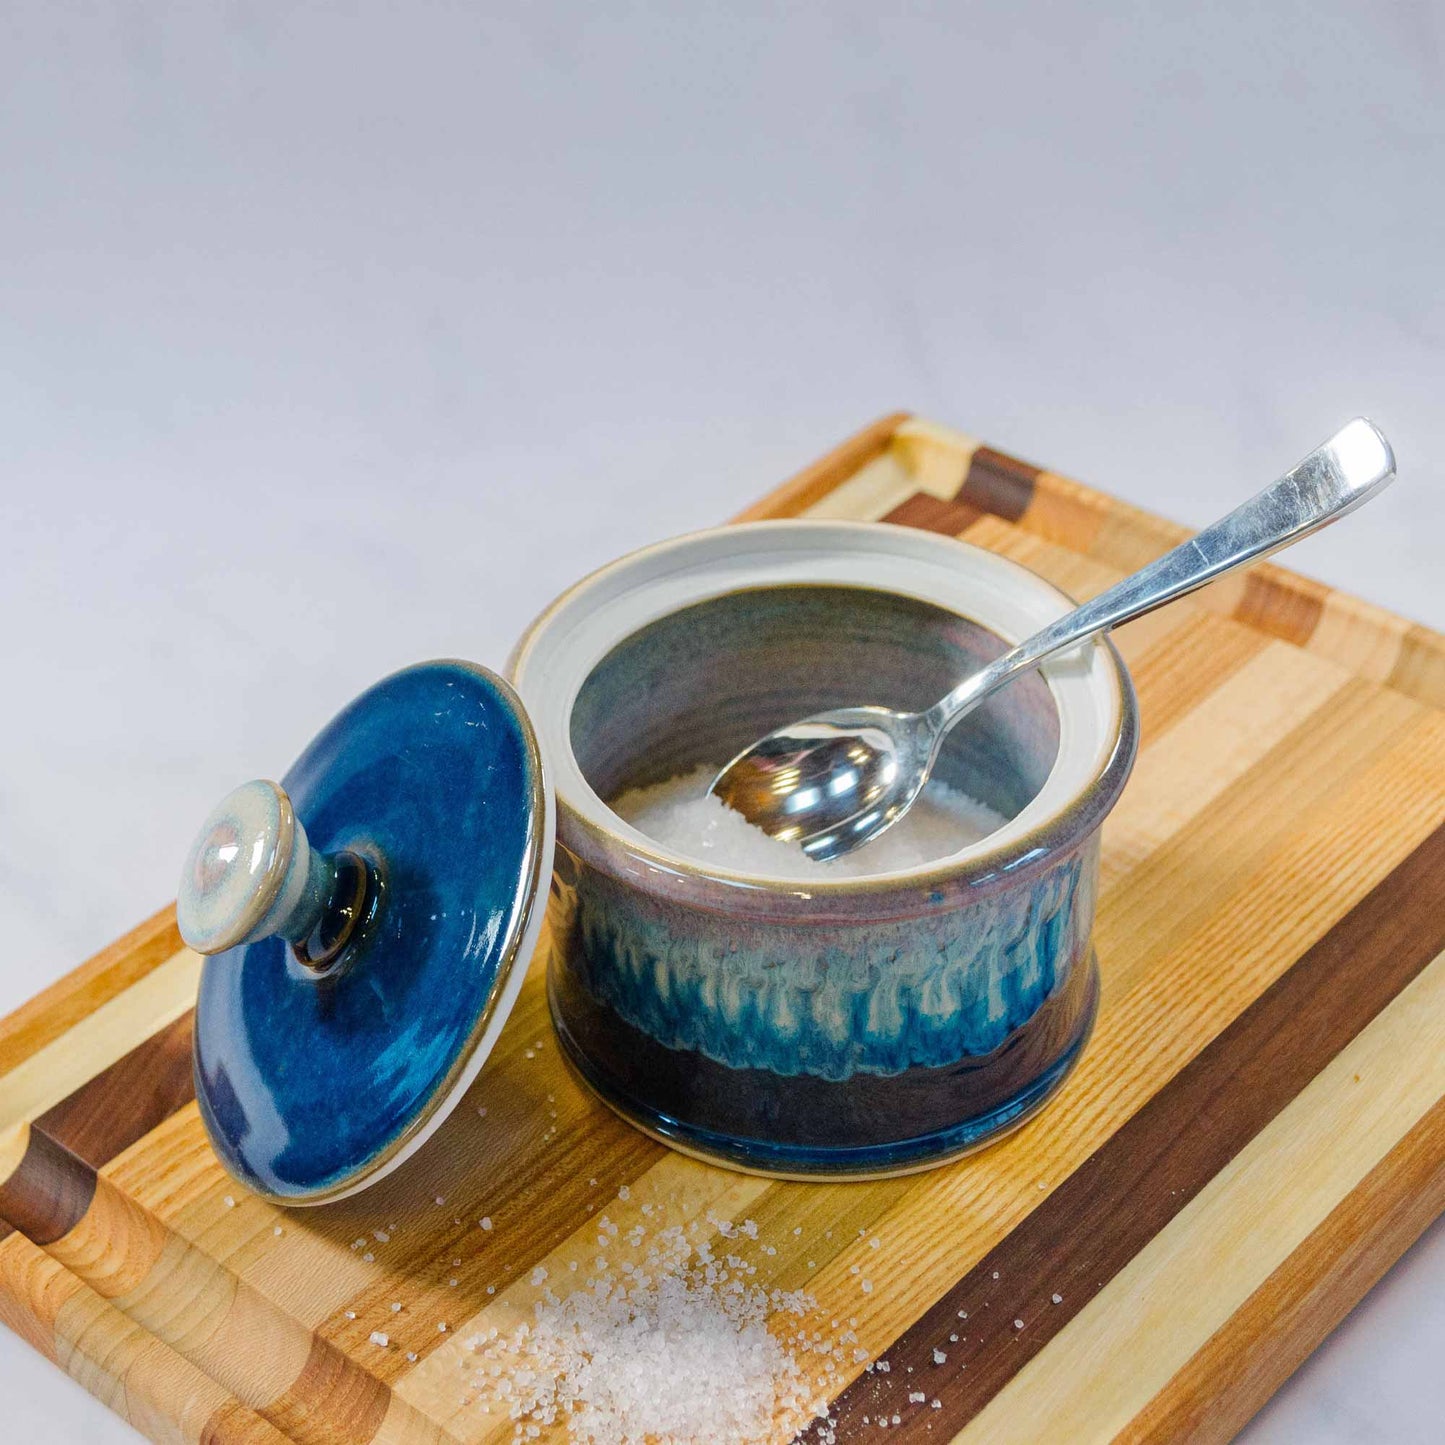  Handmade Pottery Salt Cellar in Cobalt pattern made by Georgetown Pottery in Maine